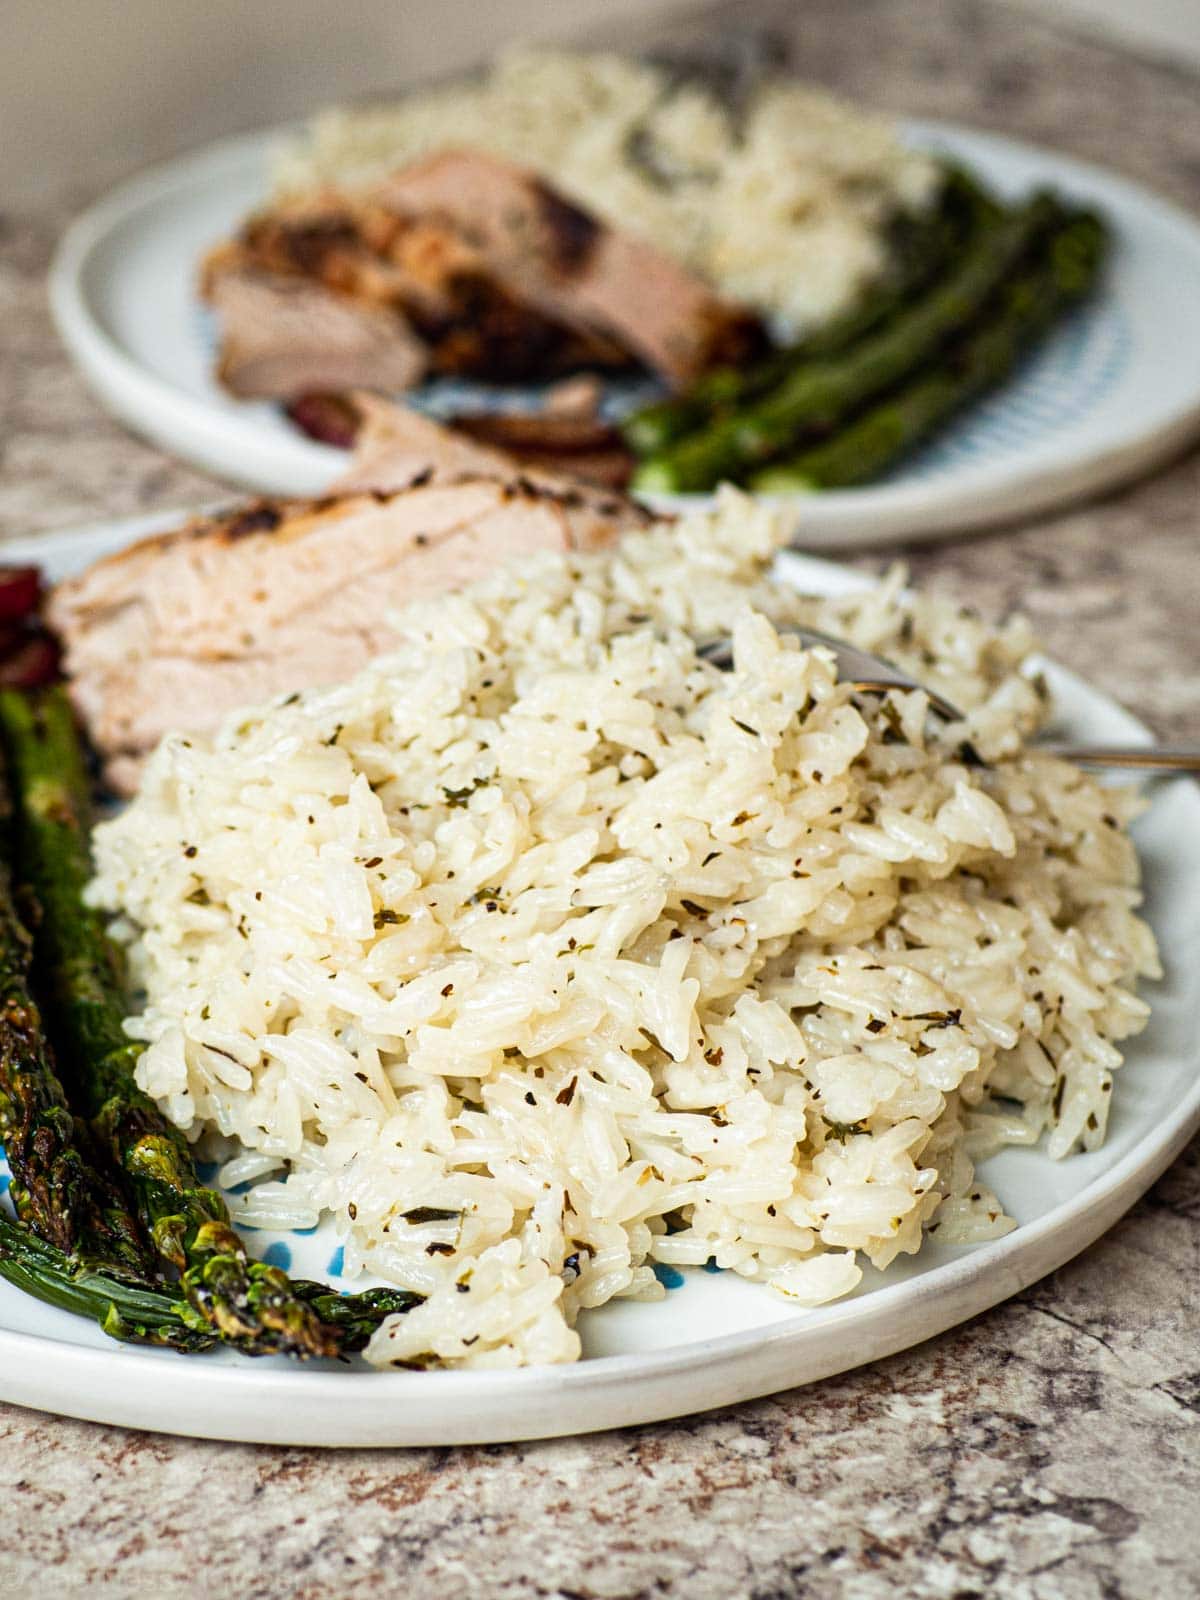 Plate of rice with asparagus.